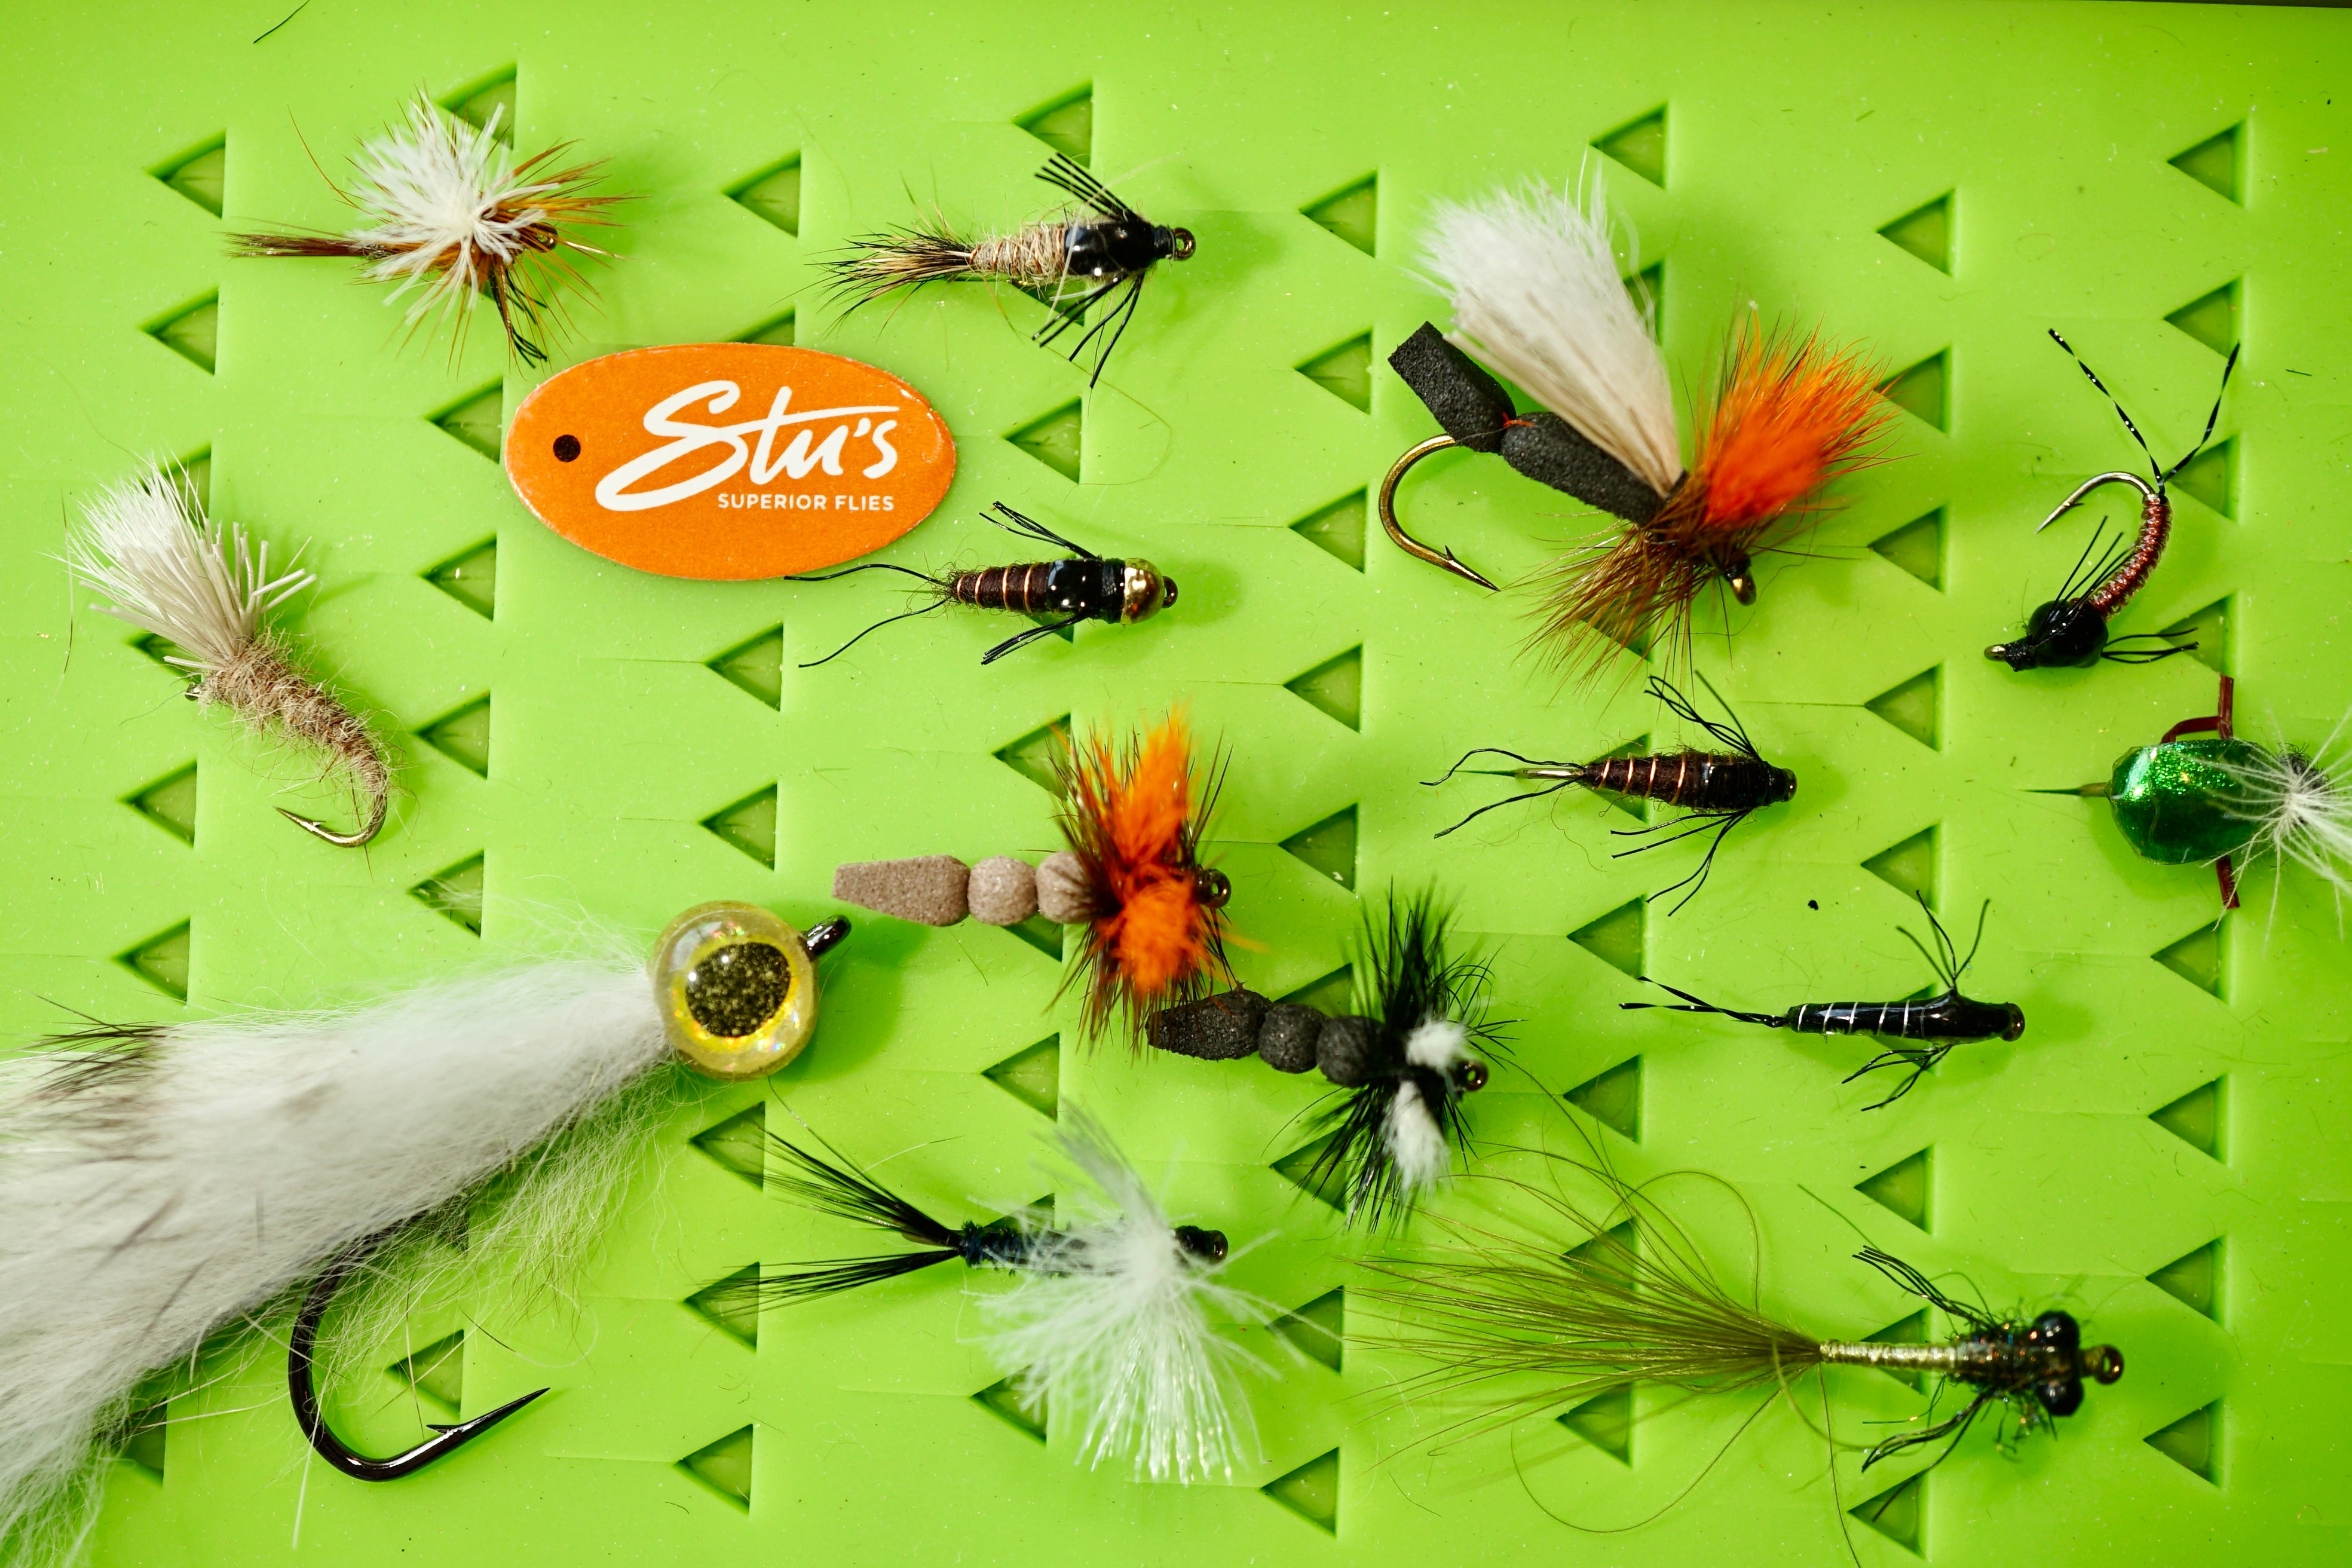 The Starter-Fly Fishing-Mix Packs